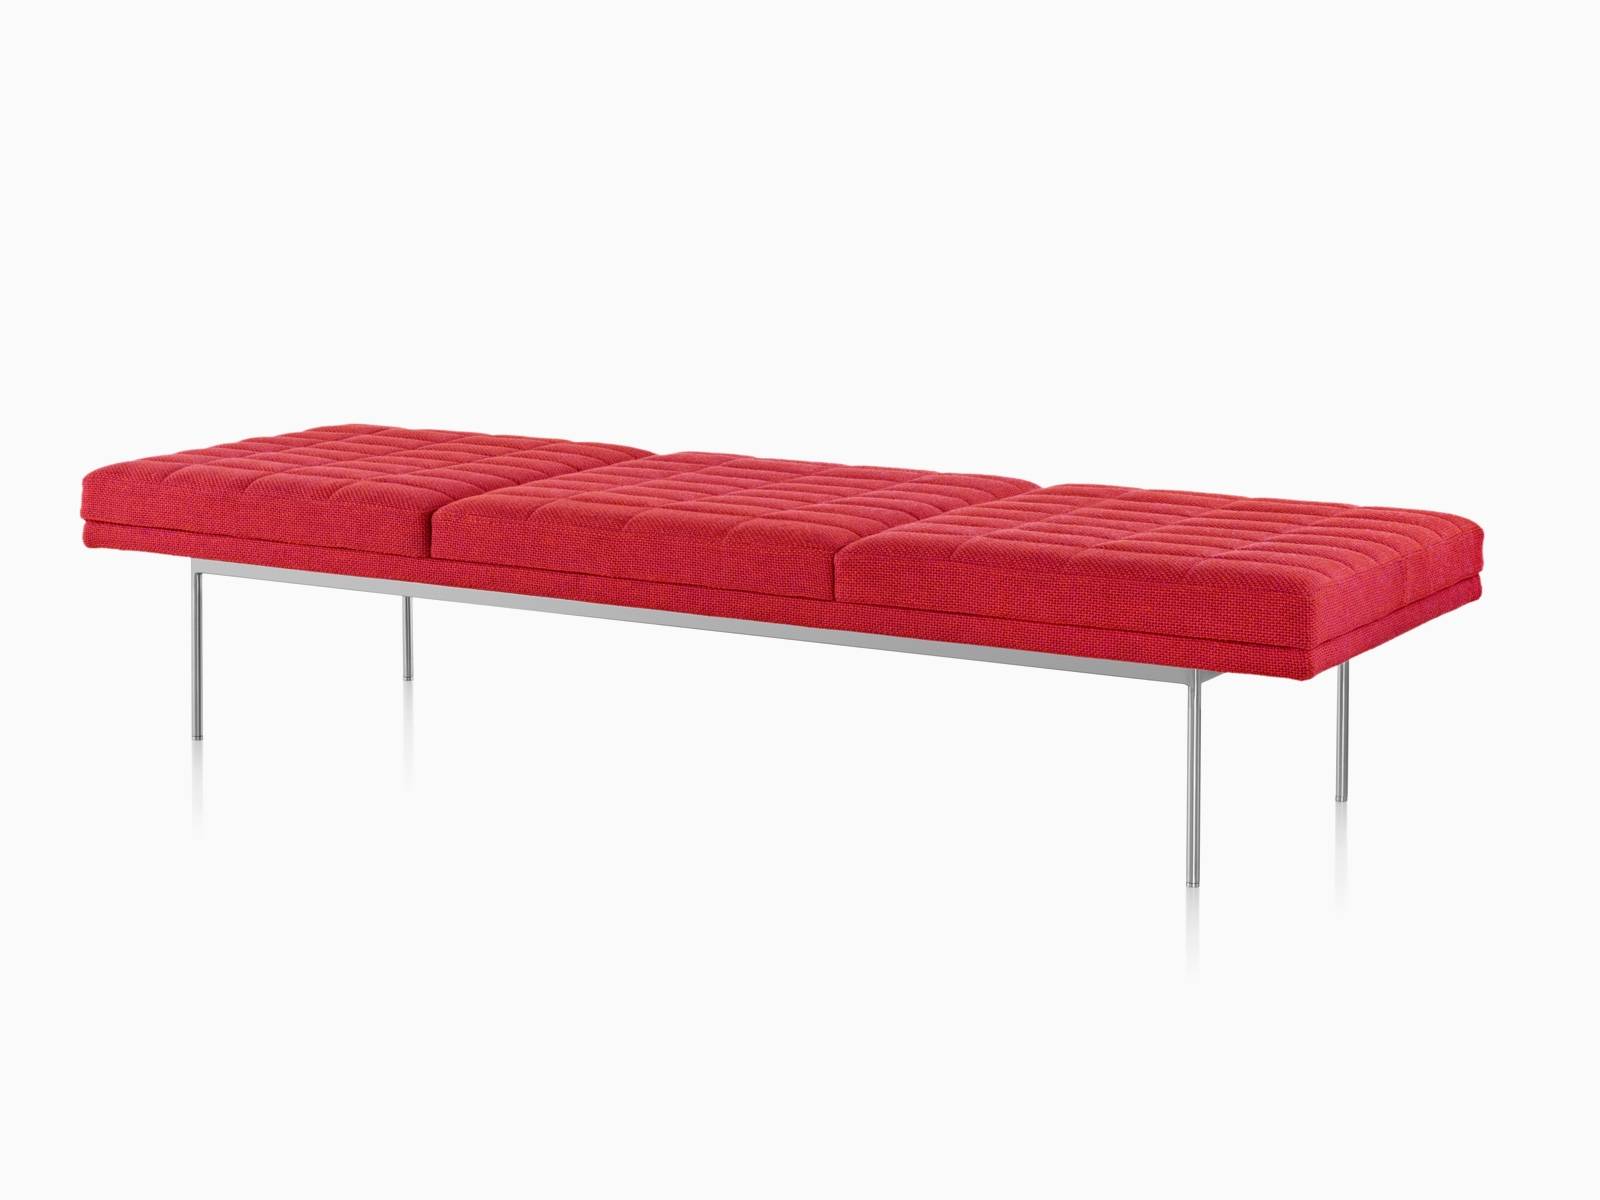 Red Tuxedo Bench with quilted upholstery bright chrome base, viewed from the front at an angle.